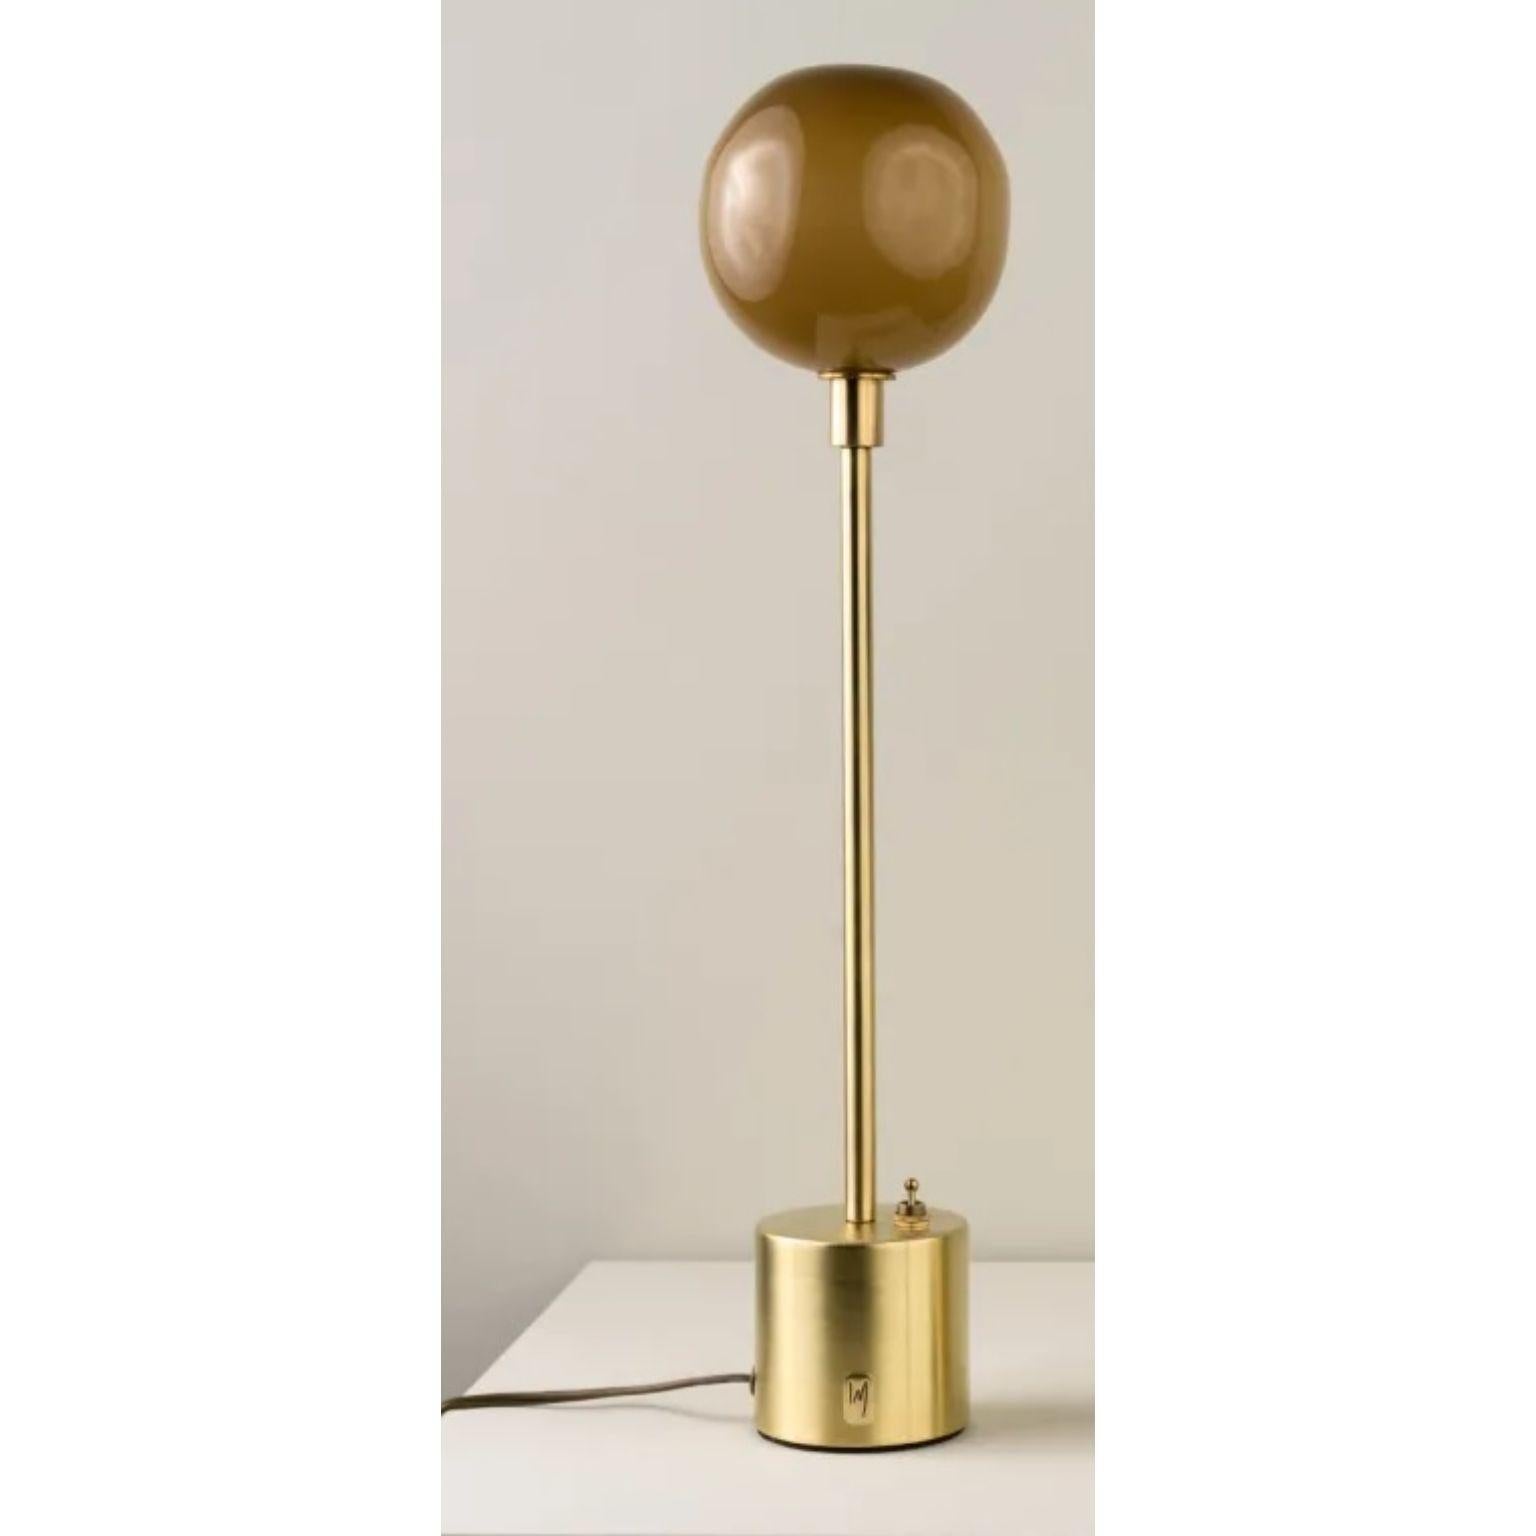 Átomo Sand Blown Glass and Brass Table Lamp by Isabel Moncada
Dimensions: Ø 13 x H 33 cm.
Materials: Brass, steel and blown glass.

Átomo is perfect to give a touch of silent light, almost like a sparkle. The simplicity of its globe is enough, a